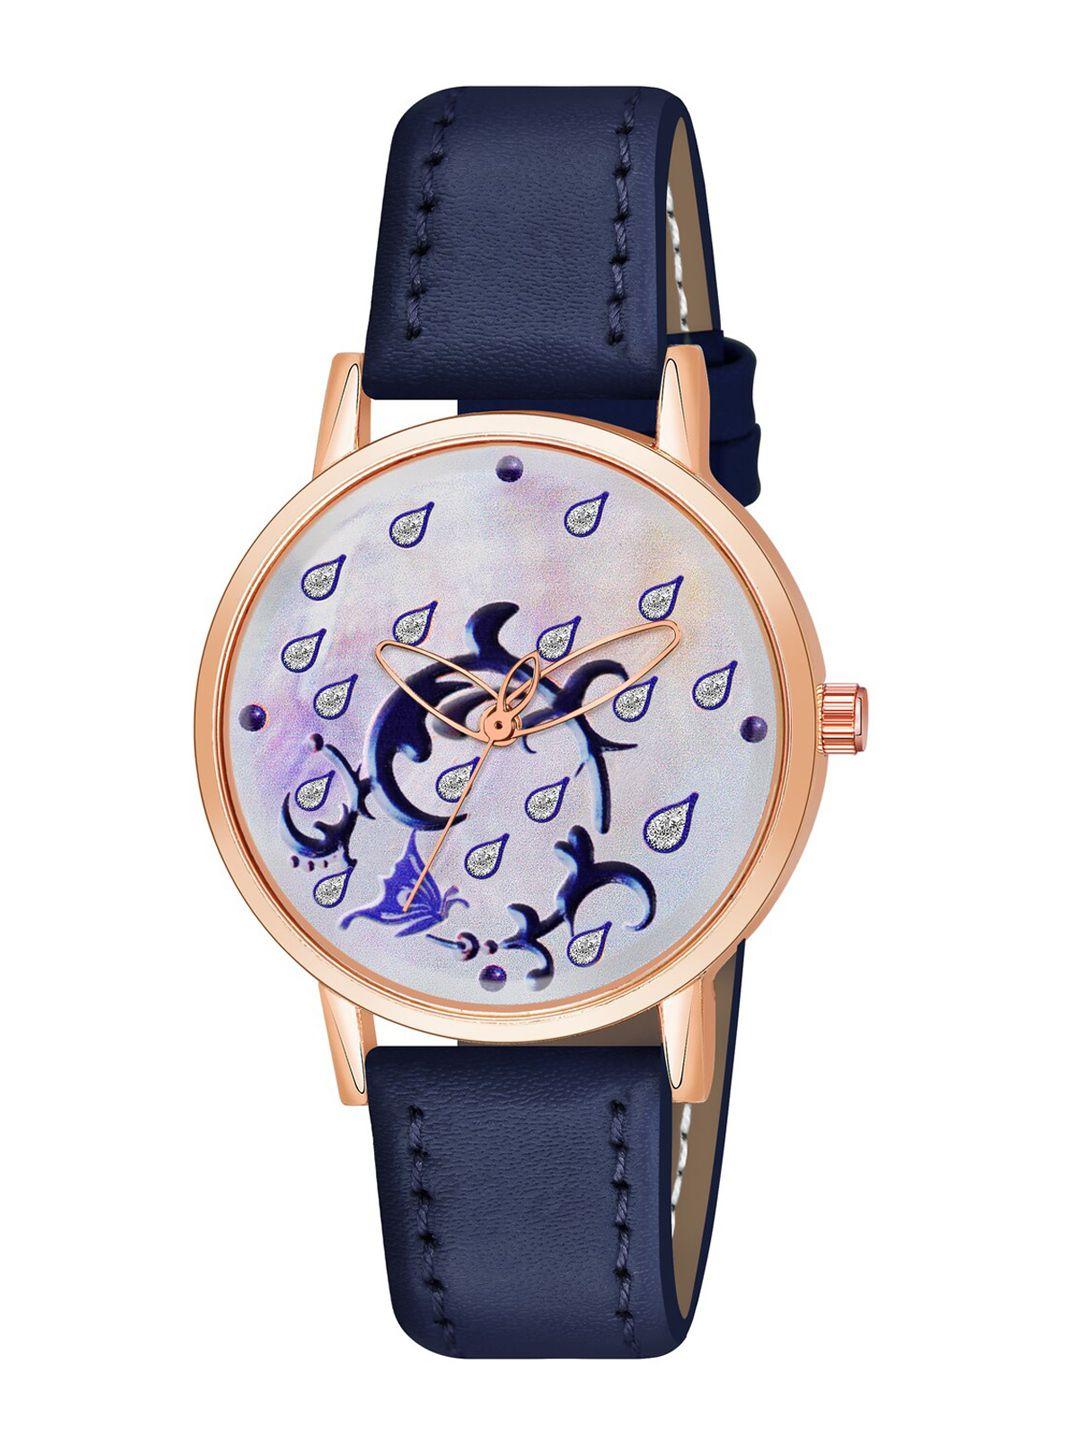 wuxi women brass printed dial & leather straps analogue watch m-876 blue